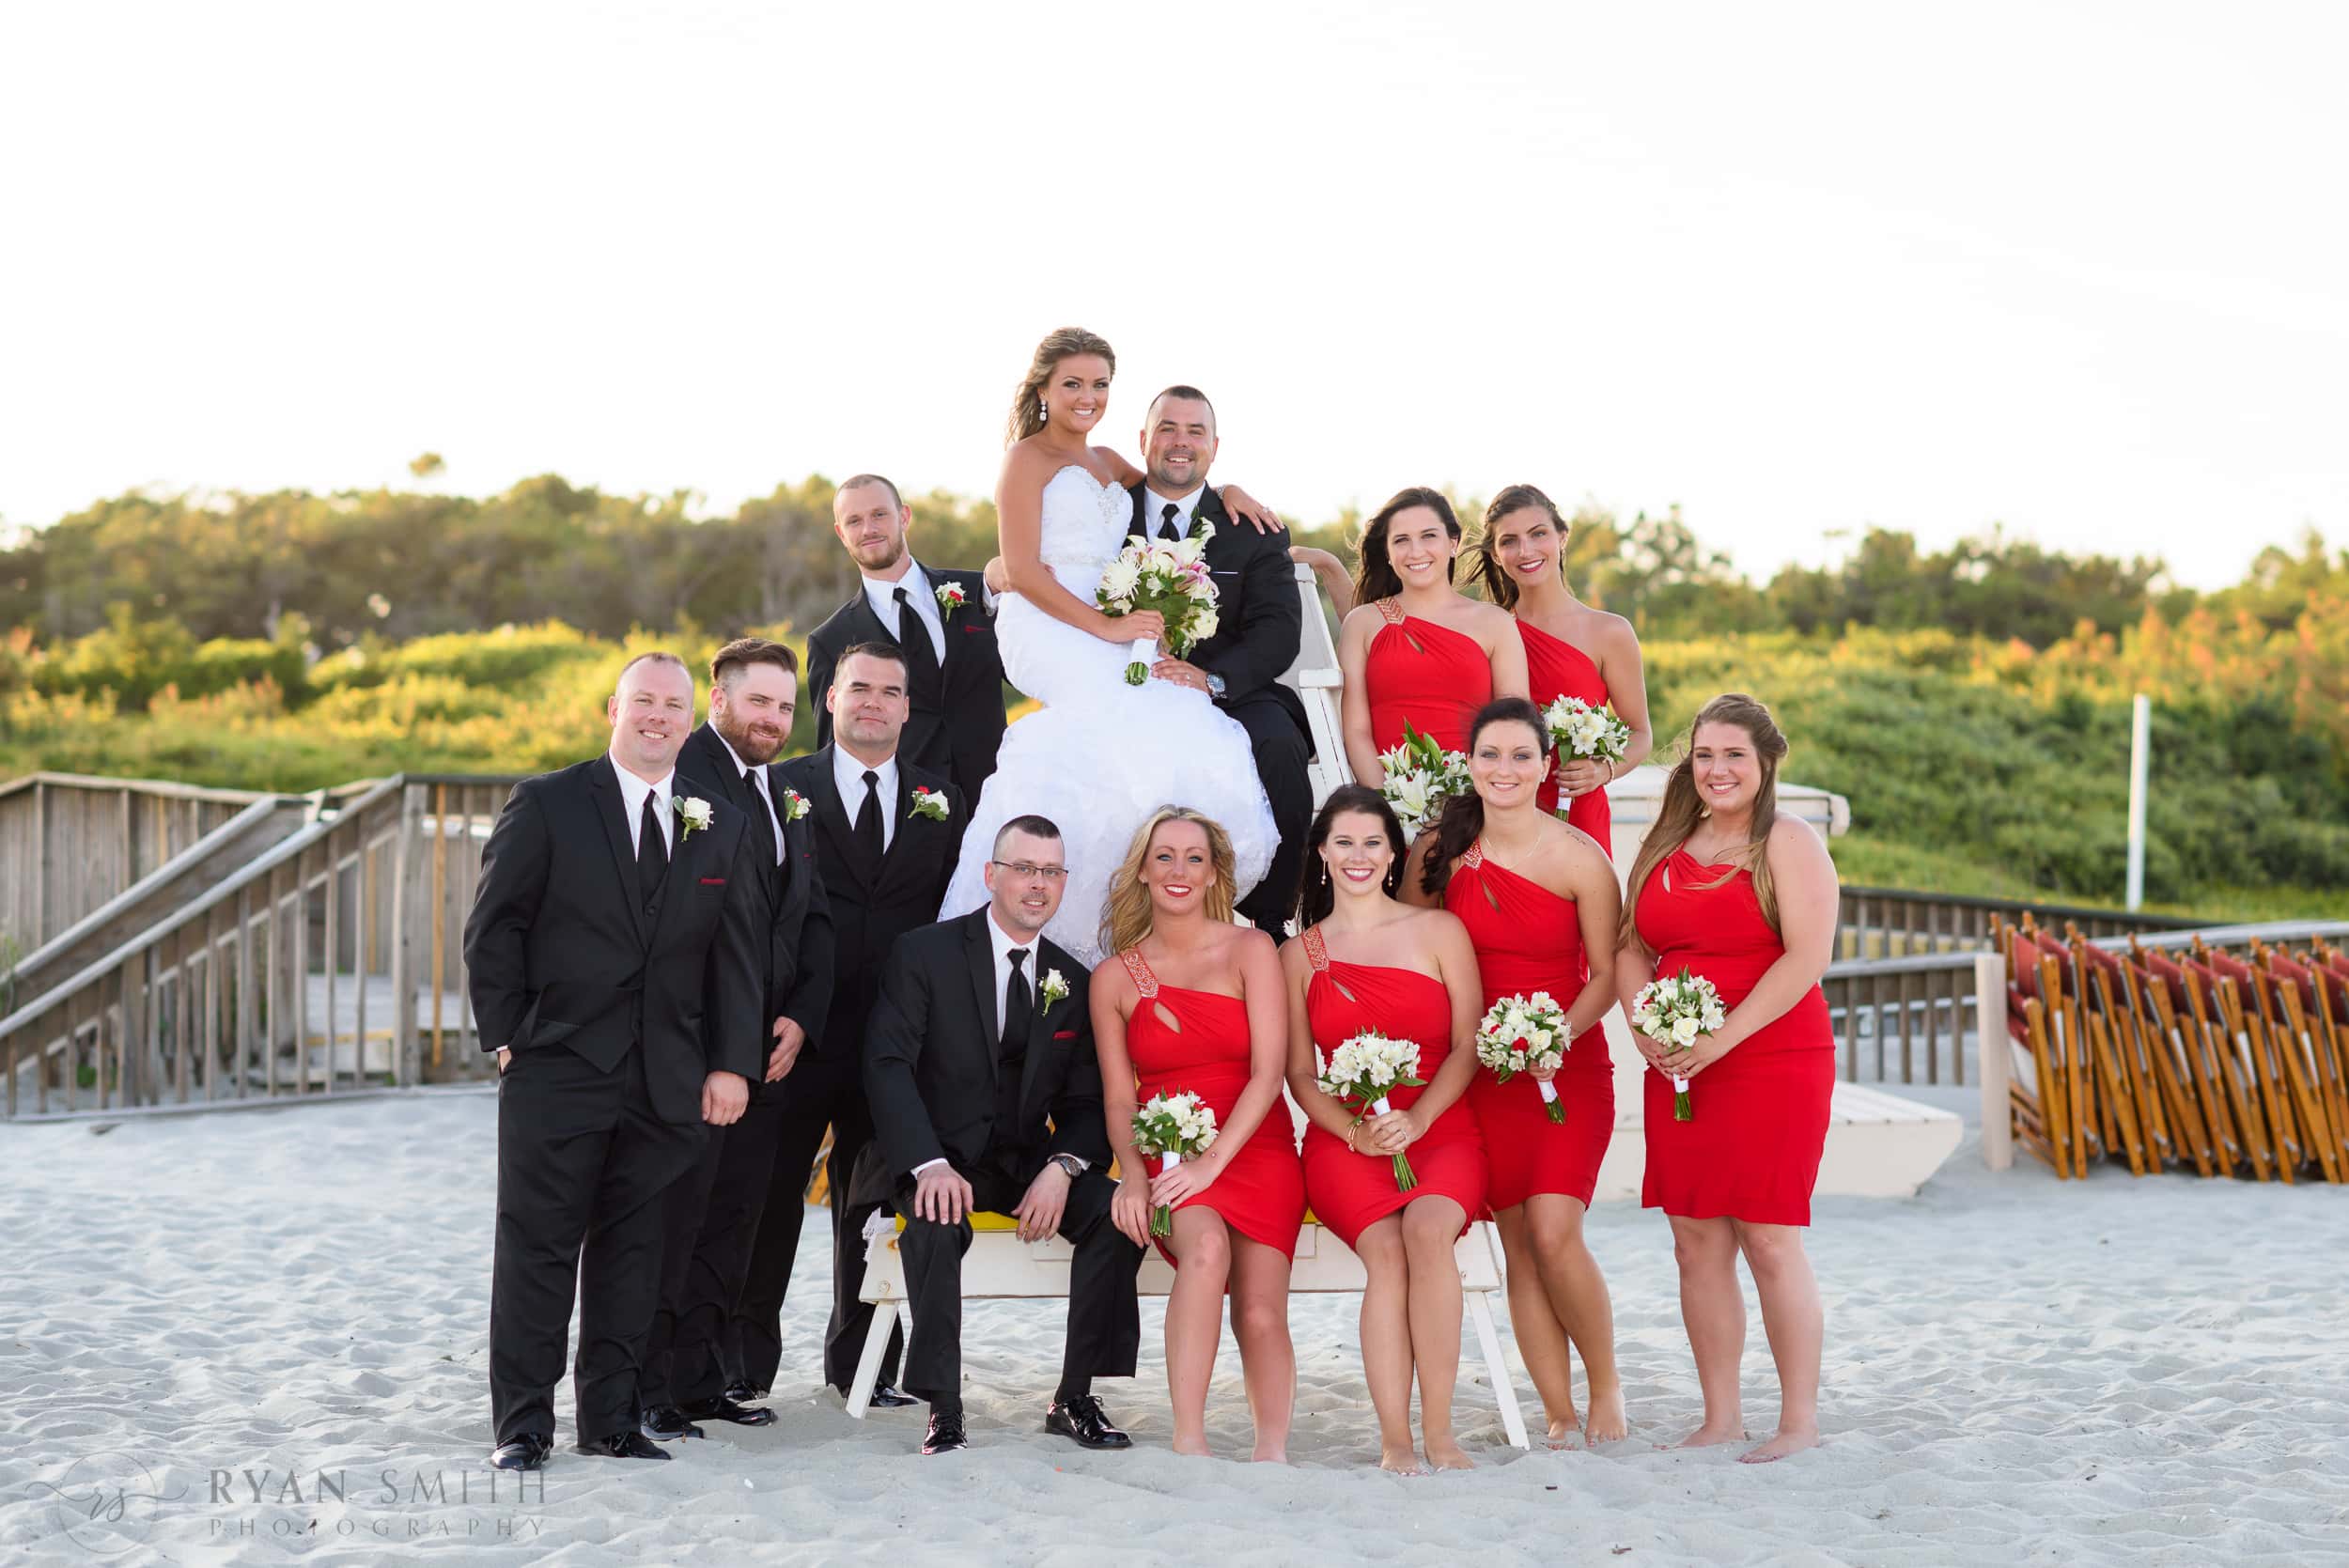 Wedding party sitting on a lifeguard stand - Myrtle Beach